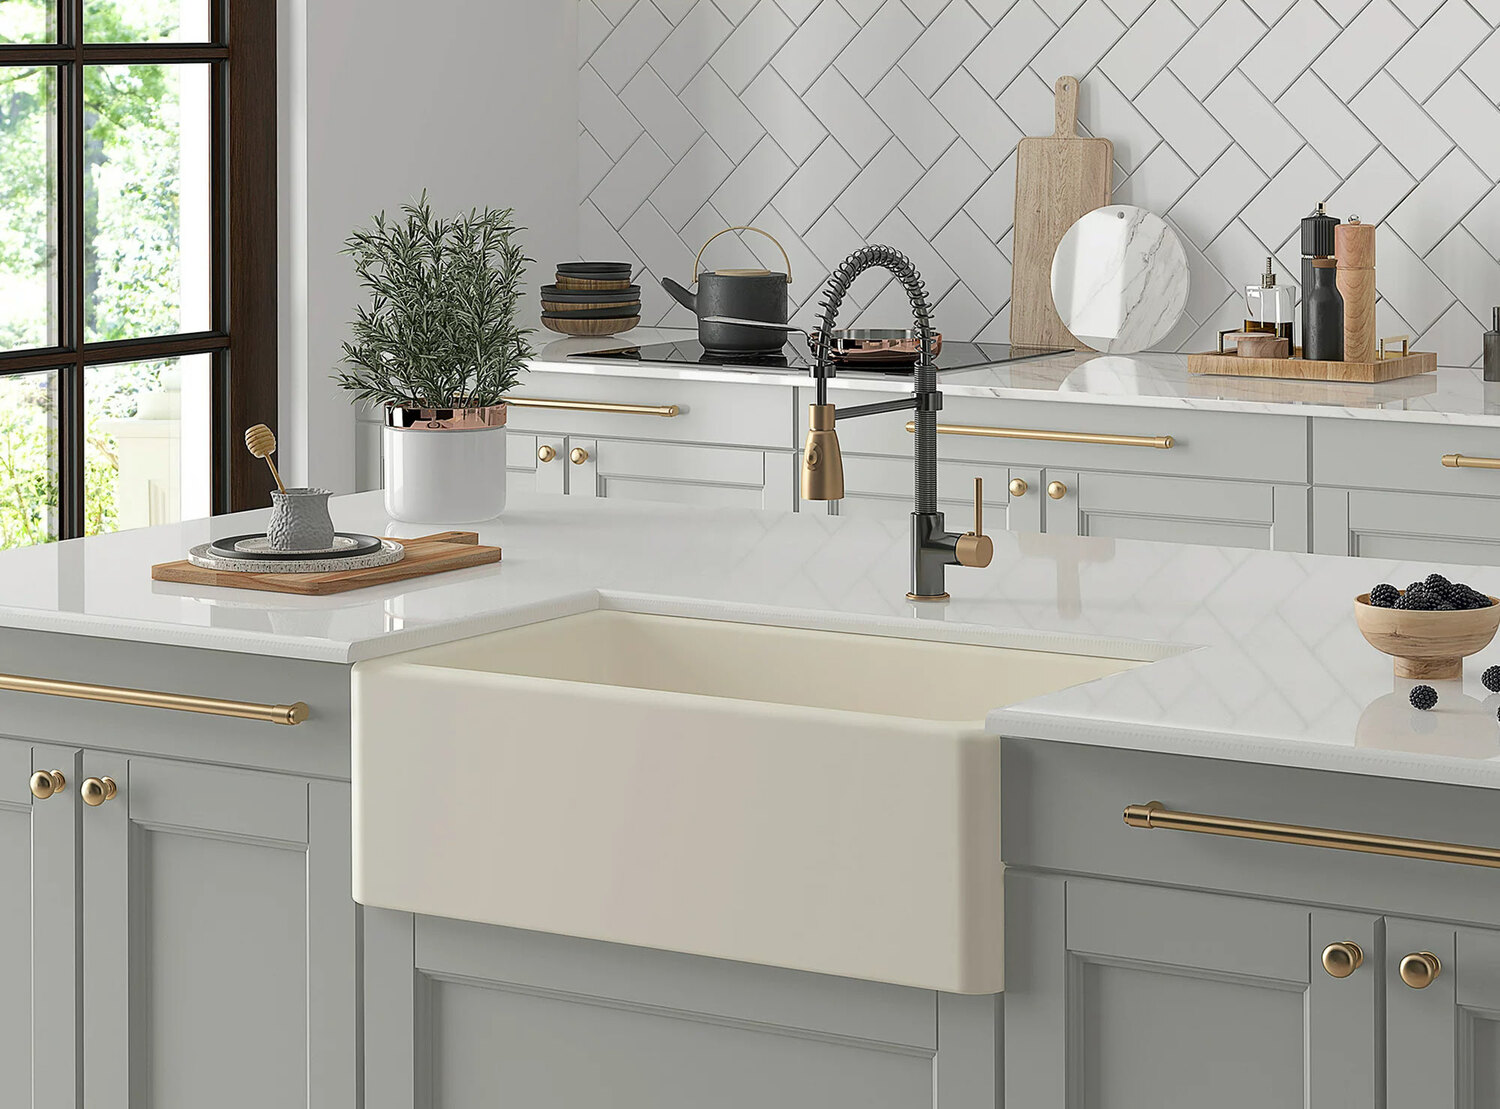 What Size Sink Fits A 30-Inch Cabinet?